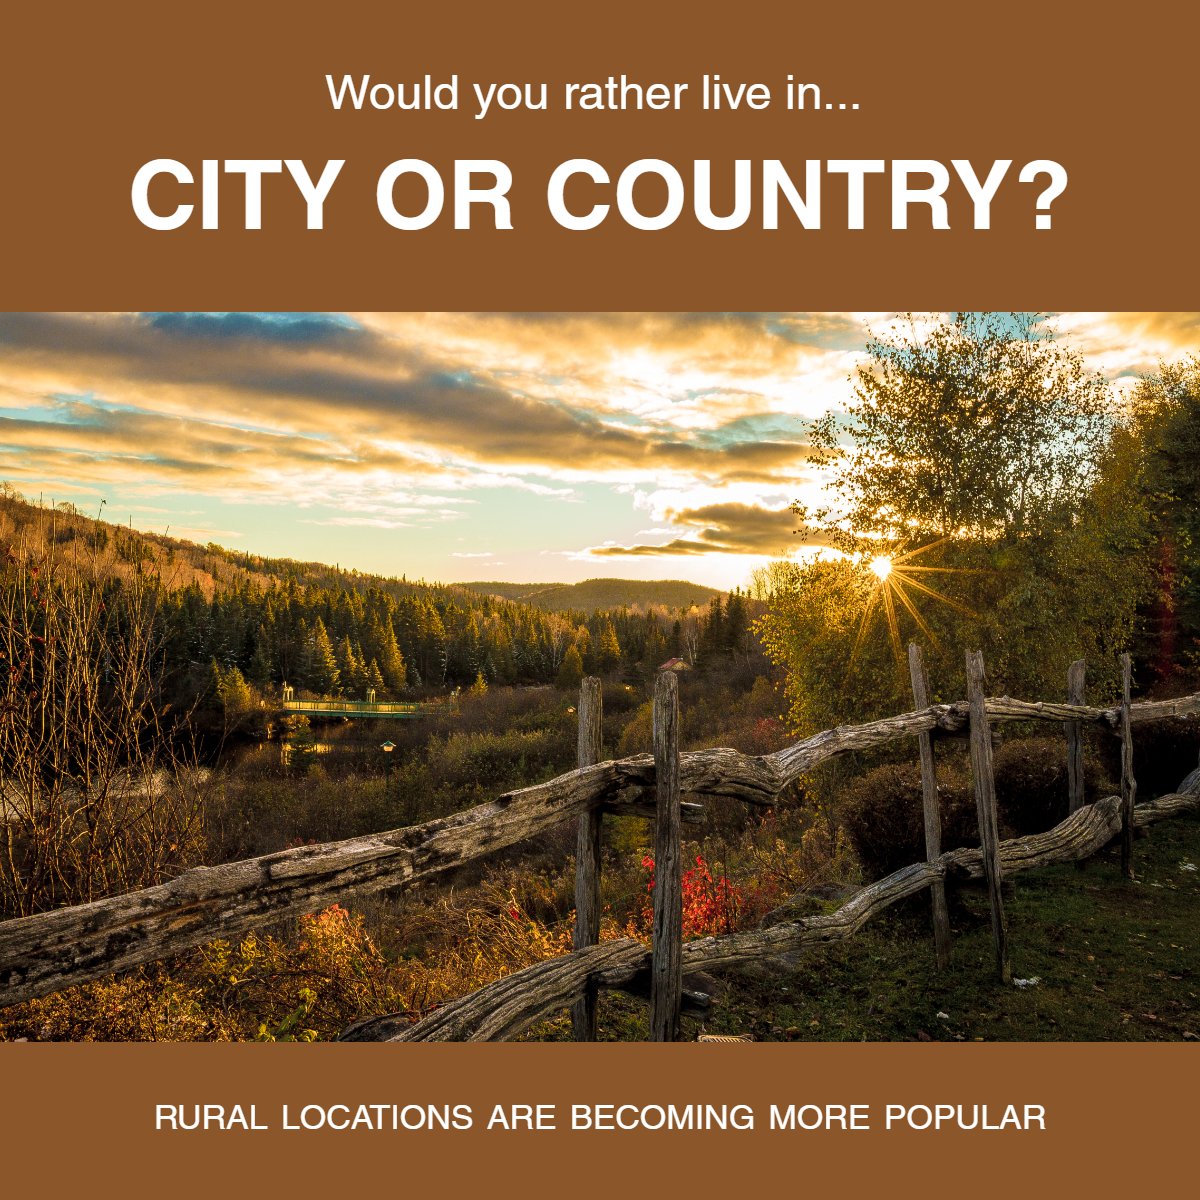 Would you rather live in the city or country? 🏙️🌄

#wouldyourather #cityorcountry #citylights #realestatequestion #realestate
 #McHoneLuxuryTeam #DanielMcHone #GlobalLuxury #ColdwellBanker #LuxuryLifestyle #LuxuryService #RealEstate #Waterfront #Luxury